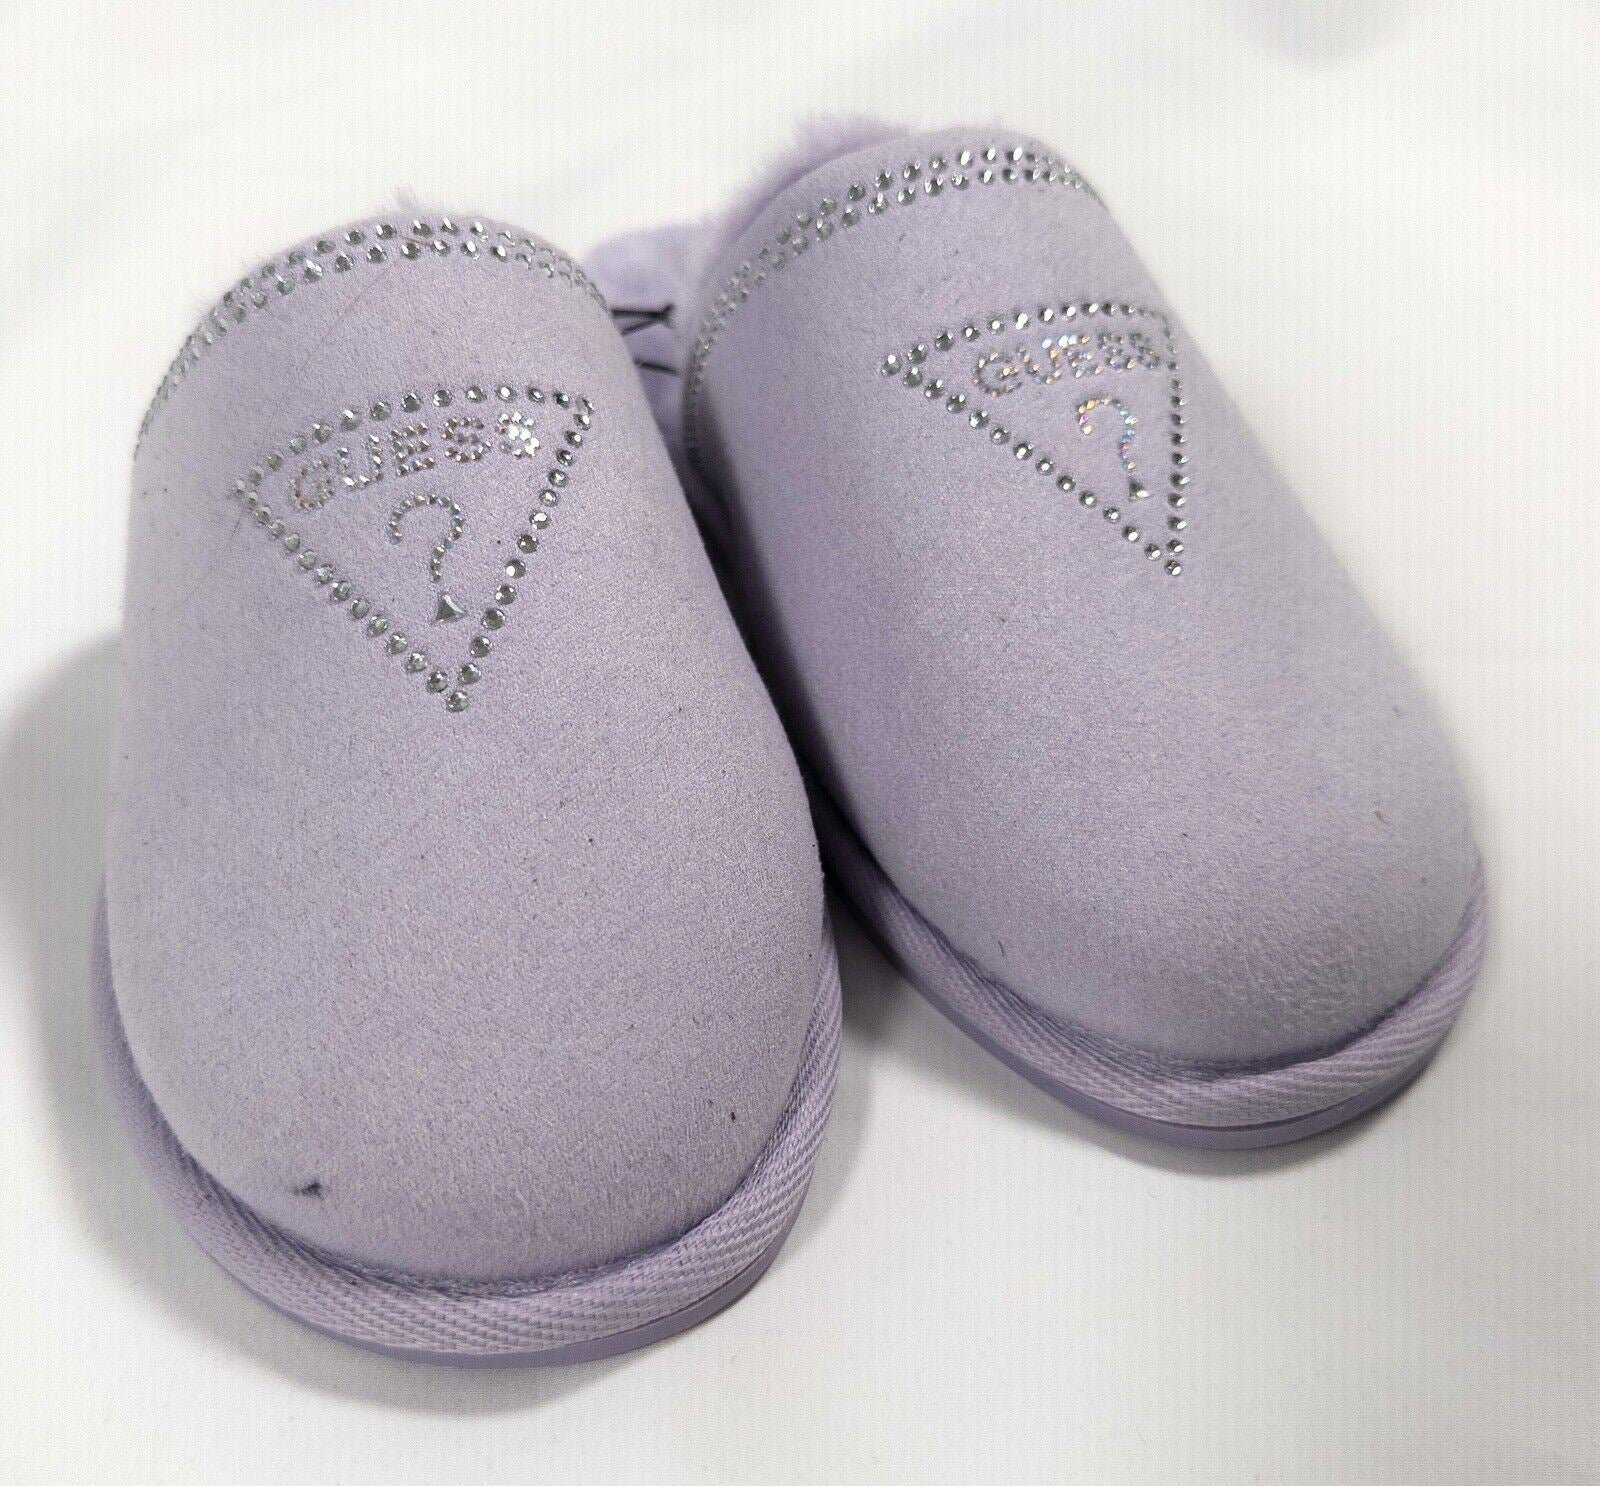 GUESS Women's Lilac Fluffy Slip On Slippers Size UK 4